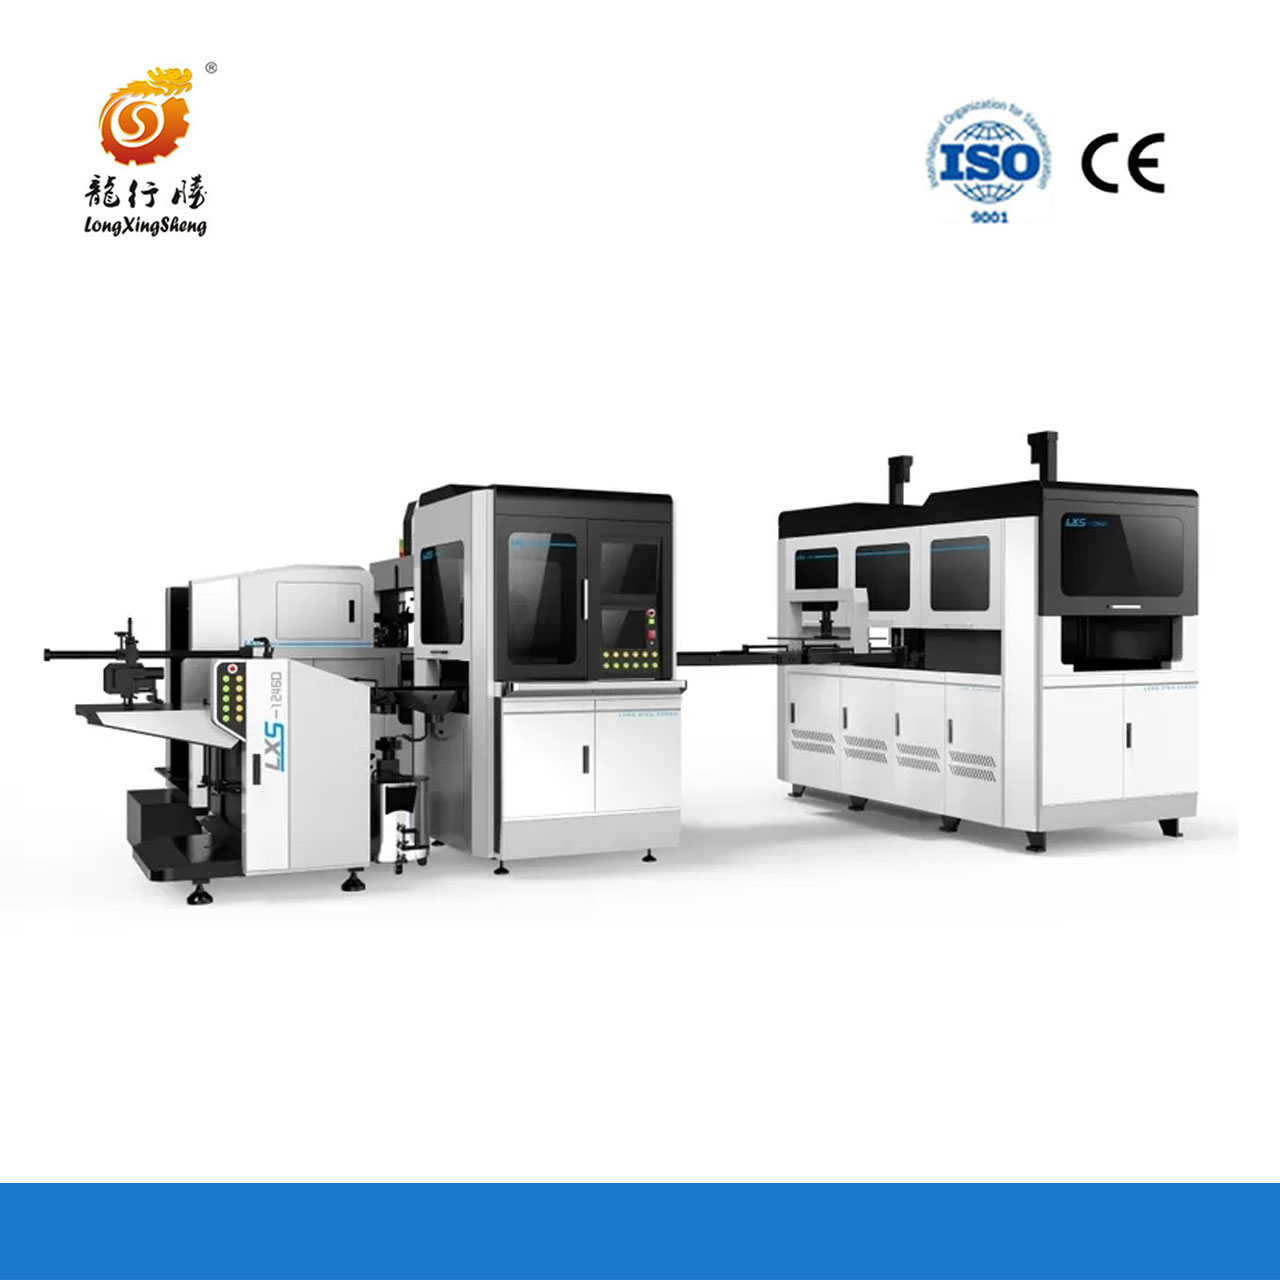 Fully Automatic Intelligent Rigid Box Packaging Machine for Gift Box